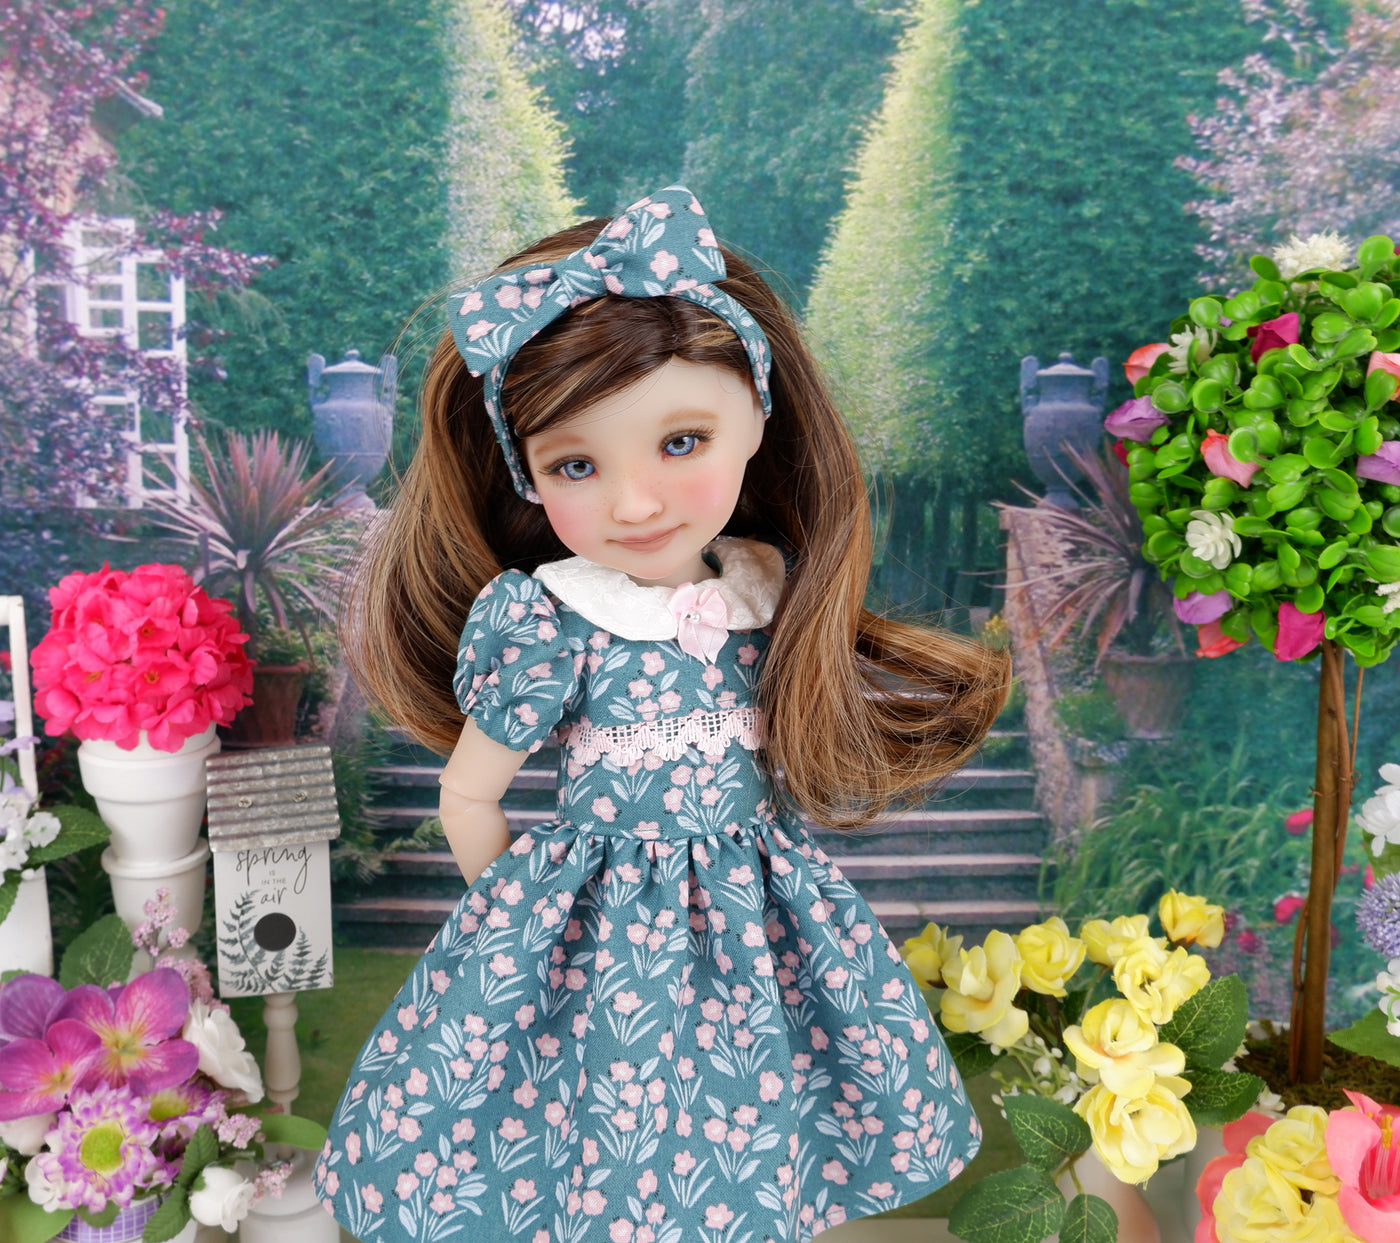 Meadow Blooms - dress ensemble with shoes for Ruby Red Fashion Friends doll